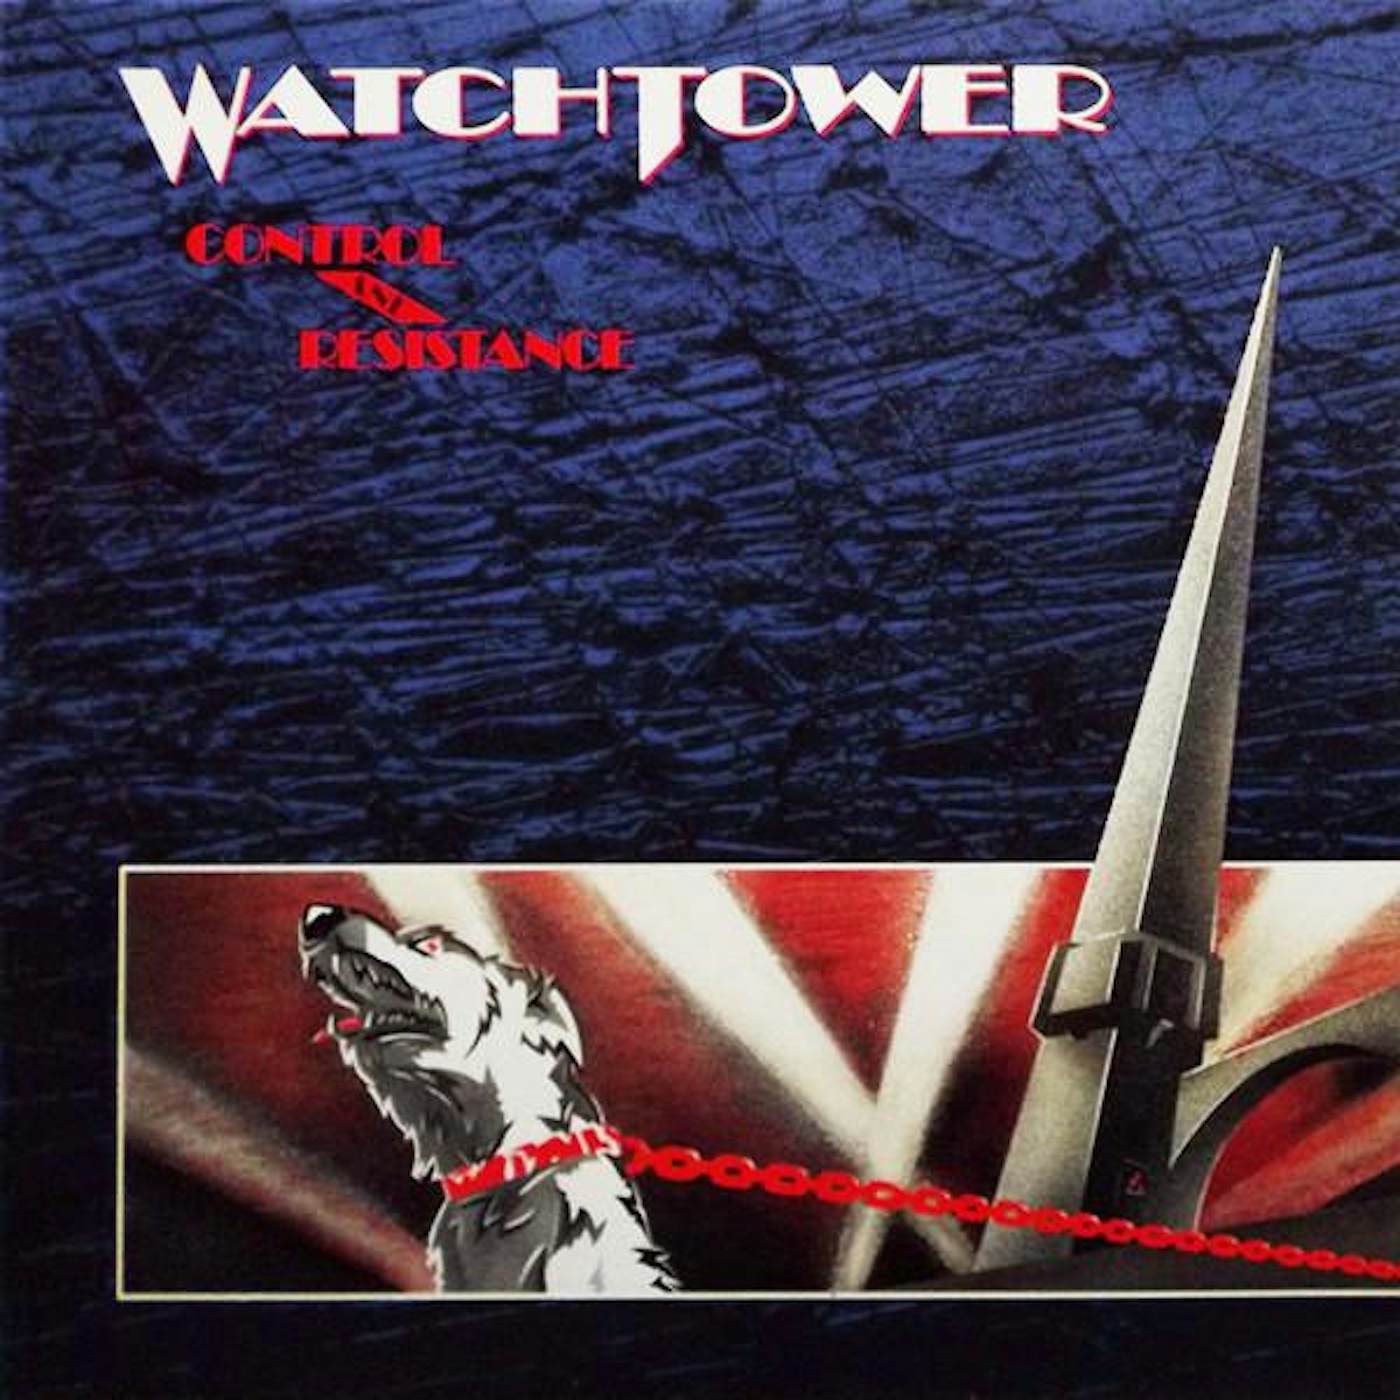 Watchtower Control and Resistance Vinyl Record